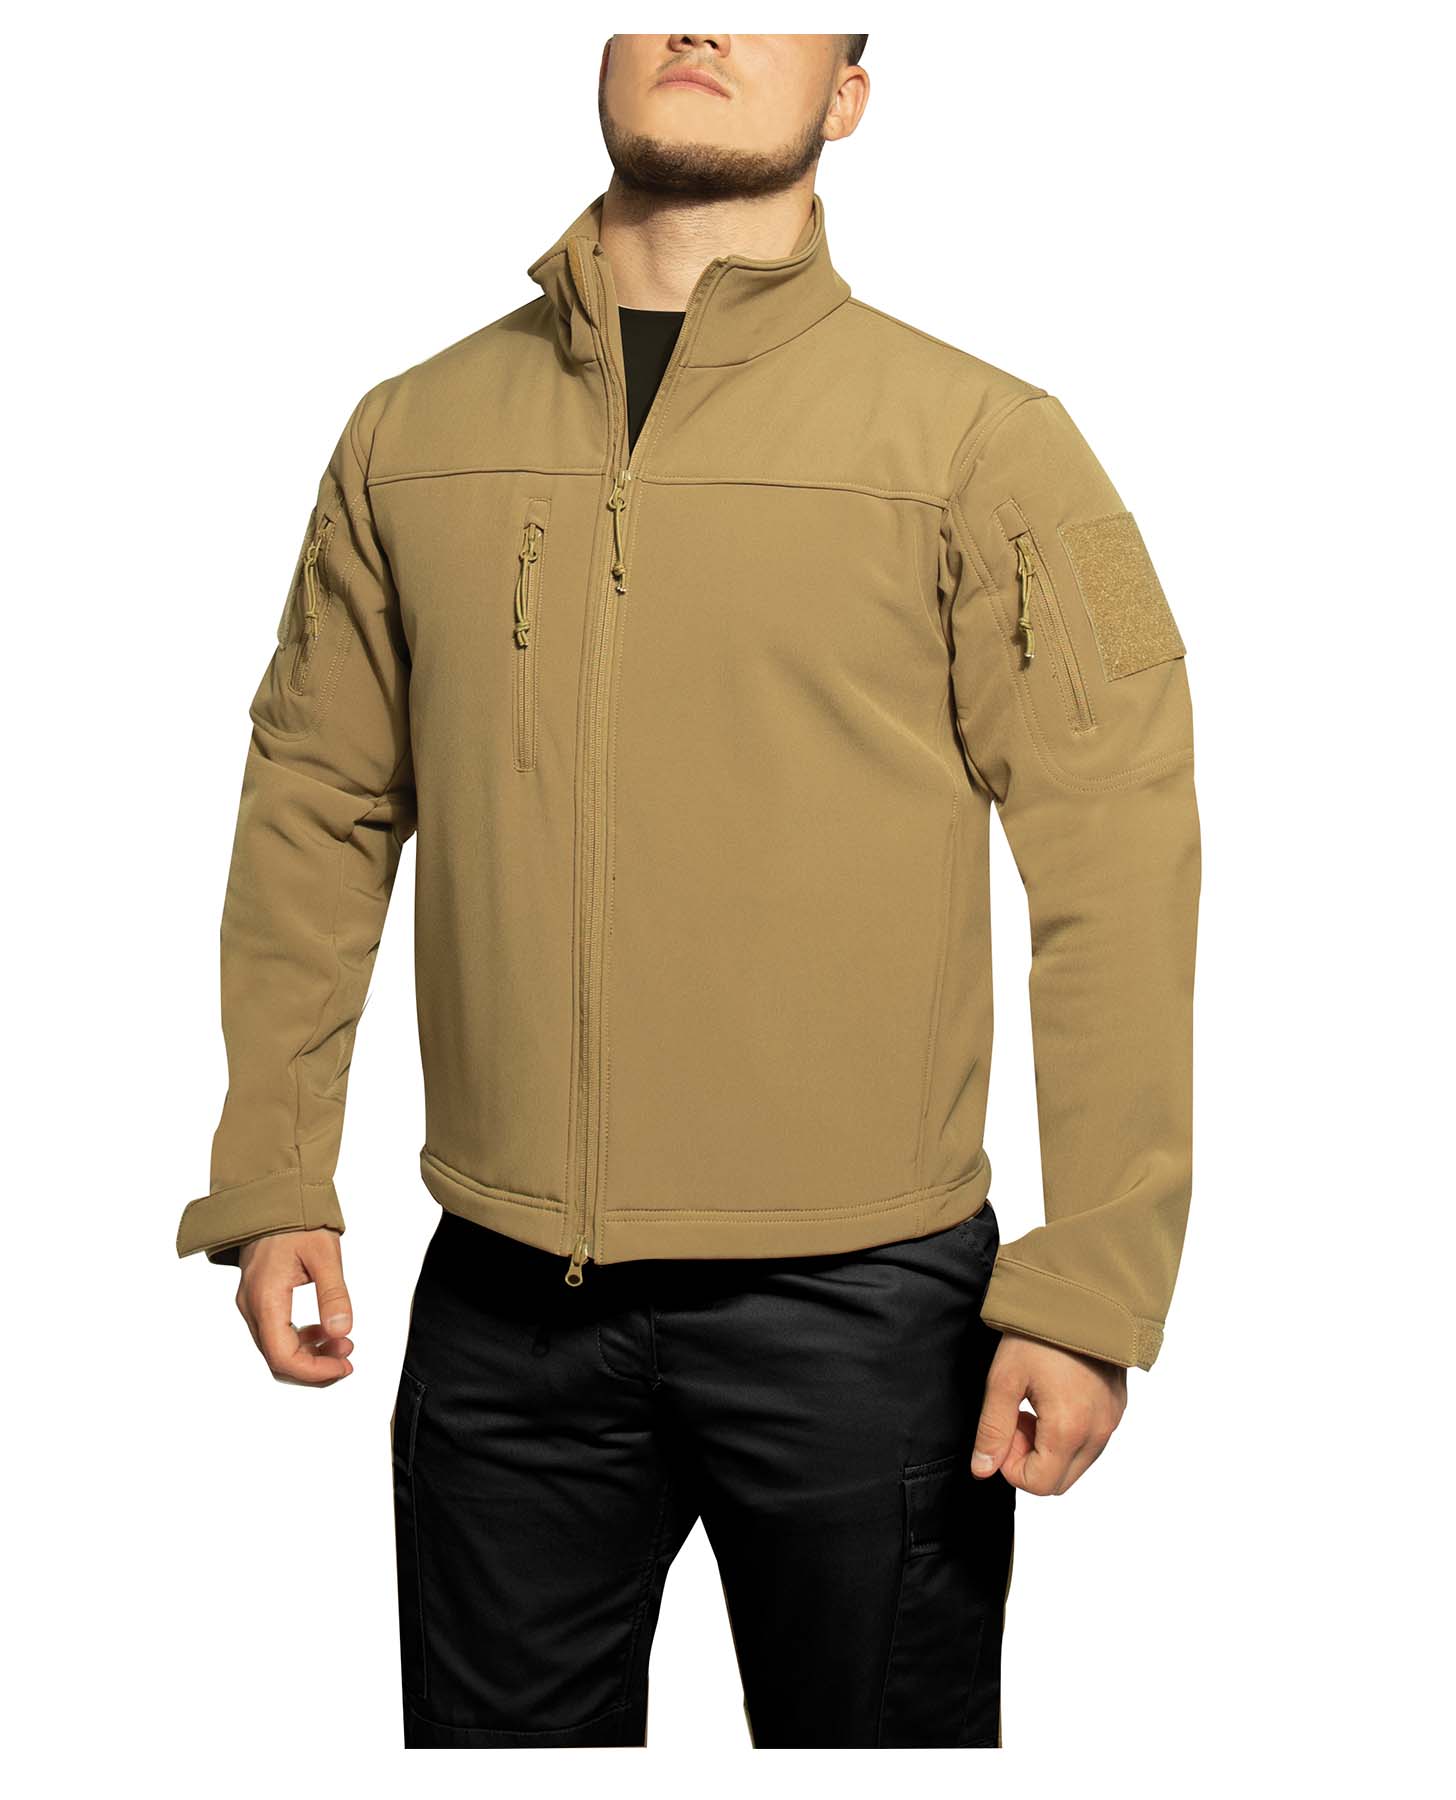 Poly Stealth Spec Ops Tactical Soft Shell Jackets